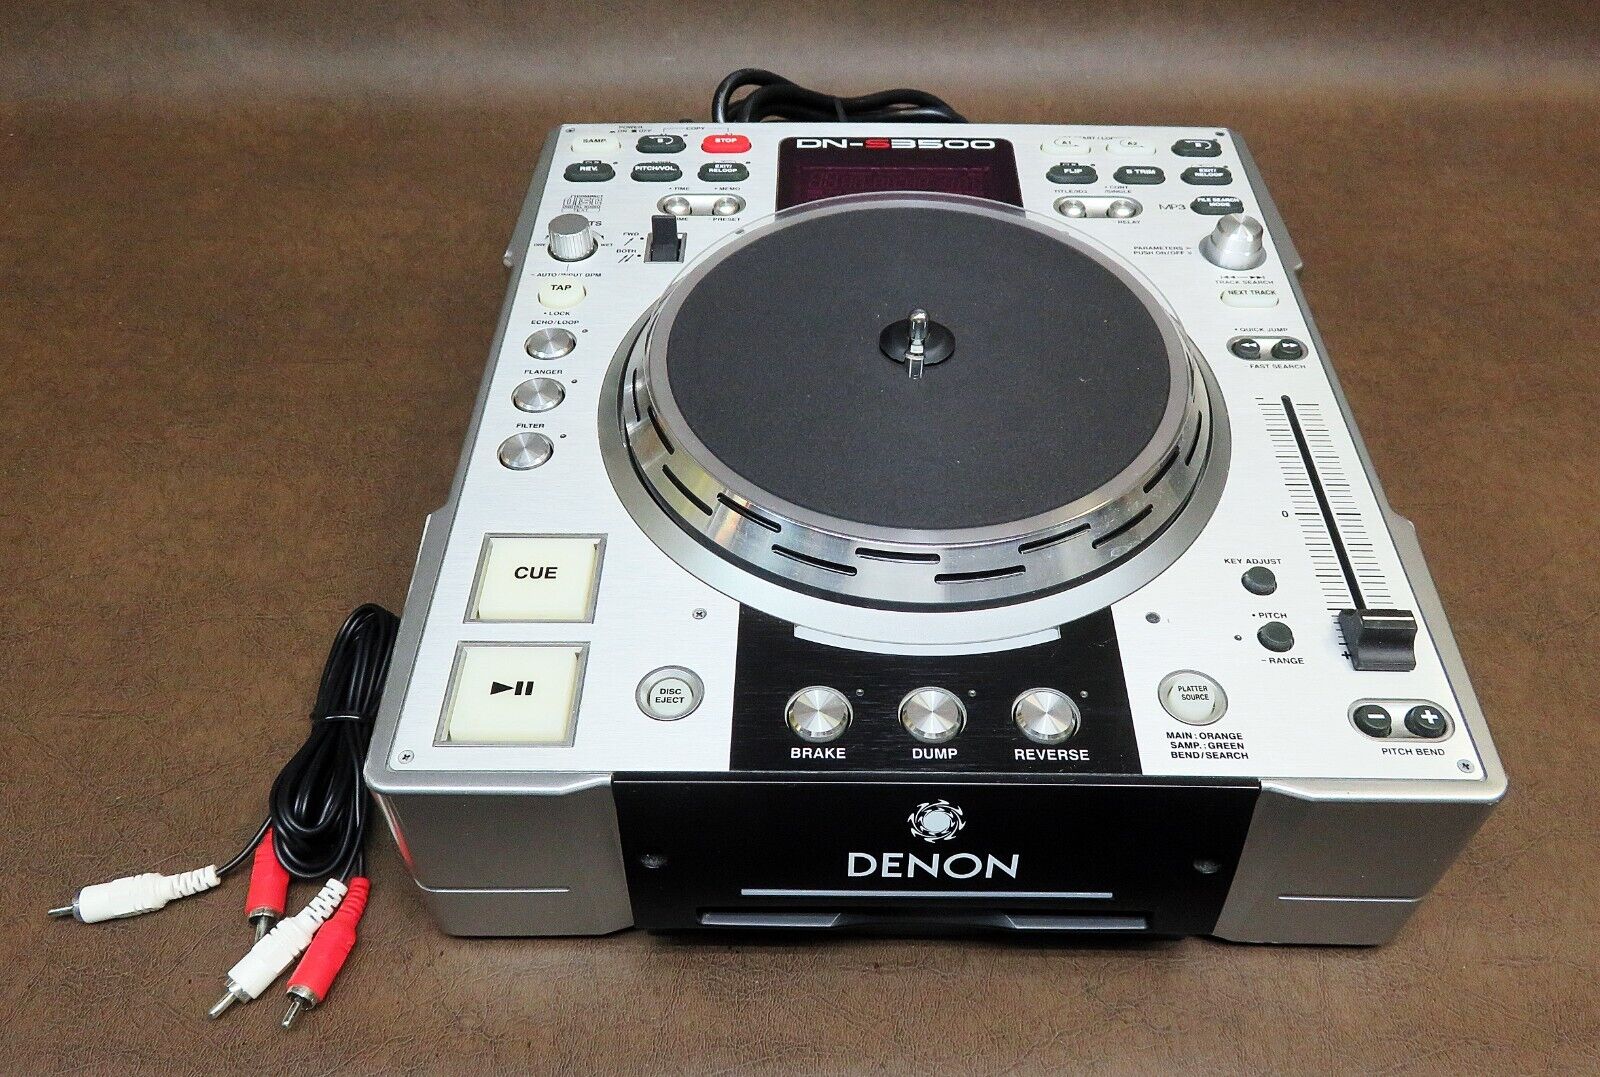 Denon DN-S3500 Professional DJ CD/MP3 Player with Direct Drive